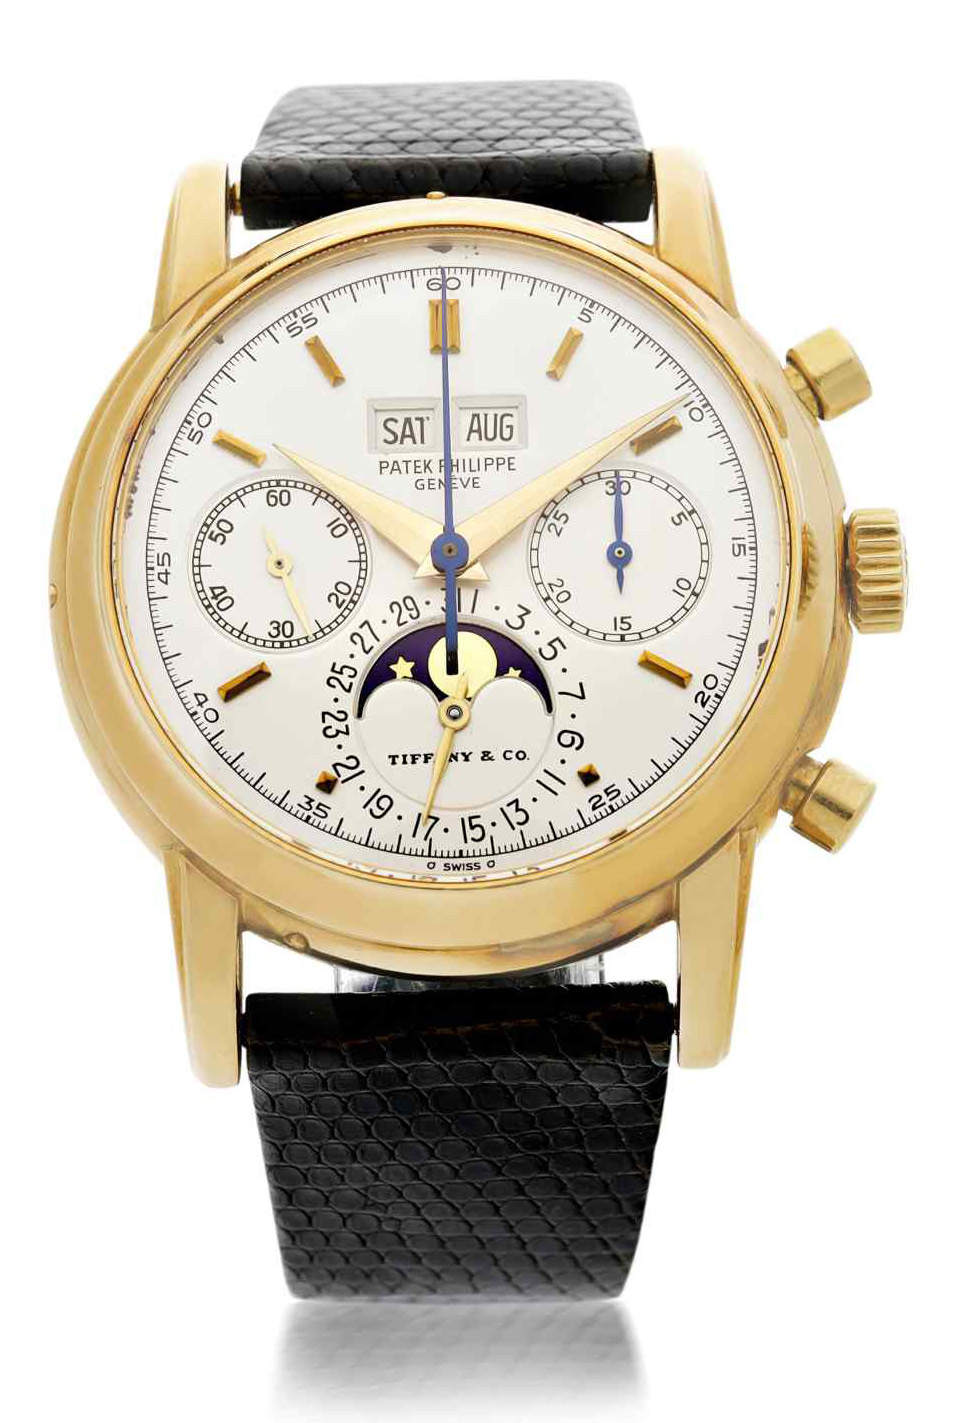 Lot 33 patek philippe fourth series ref. 2499 signed by tiffany 1